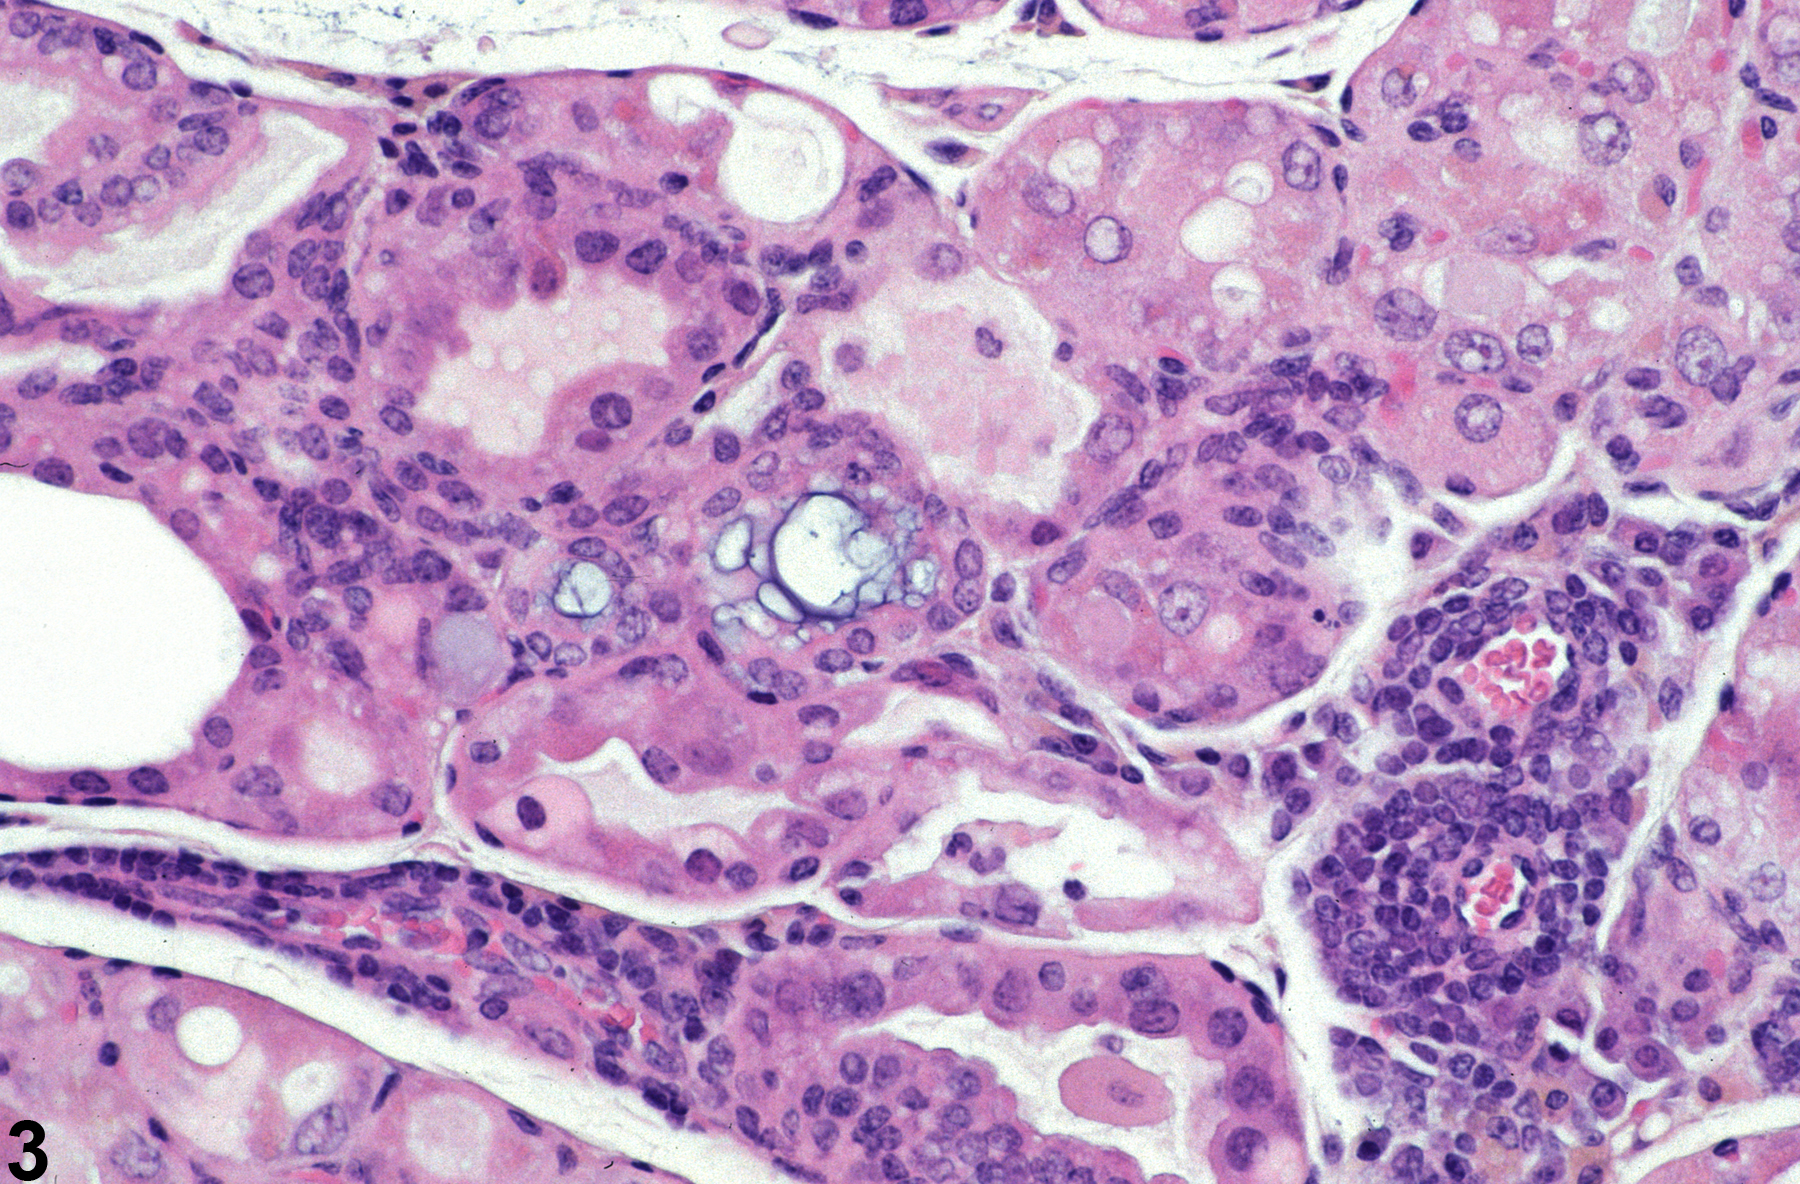 Image of inflammation in the thyroid gland from a female Tg.AC (FVB/N) mouse in a chronic study